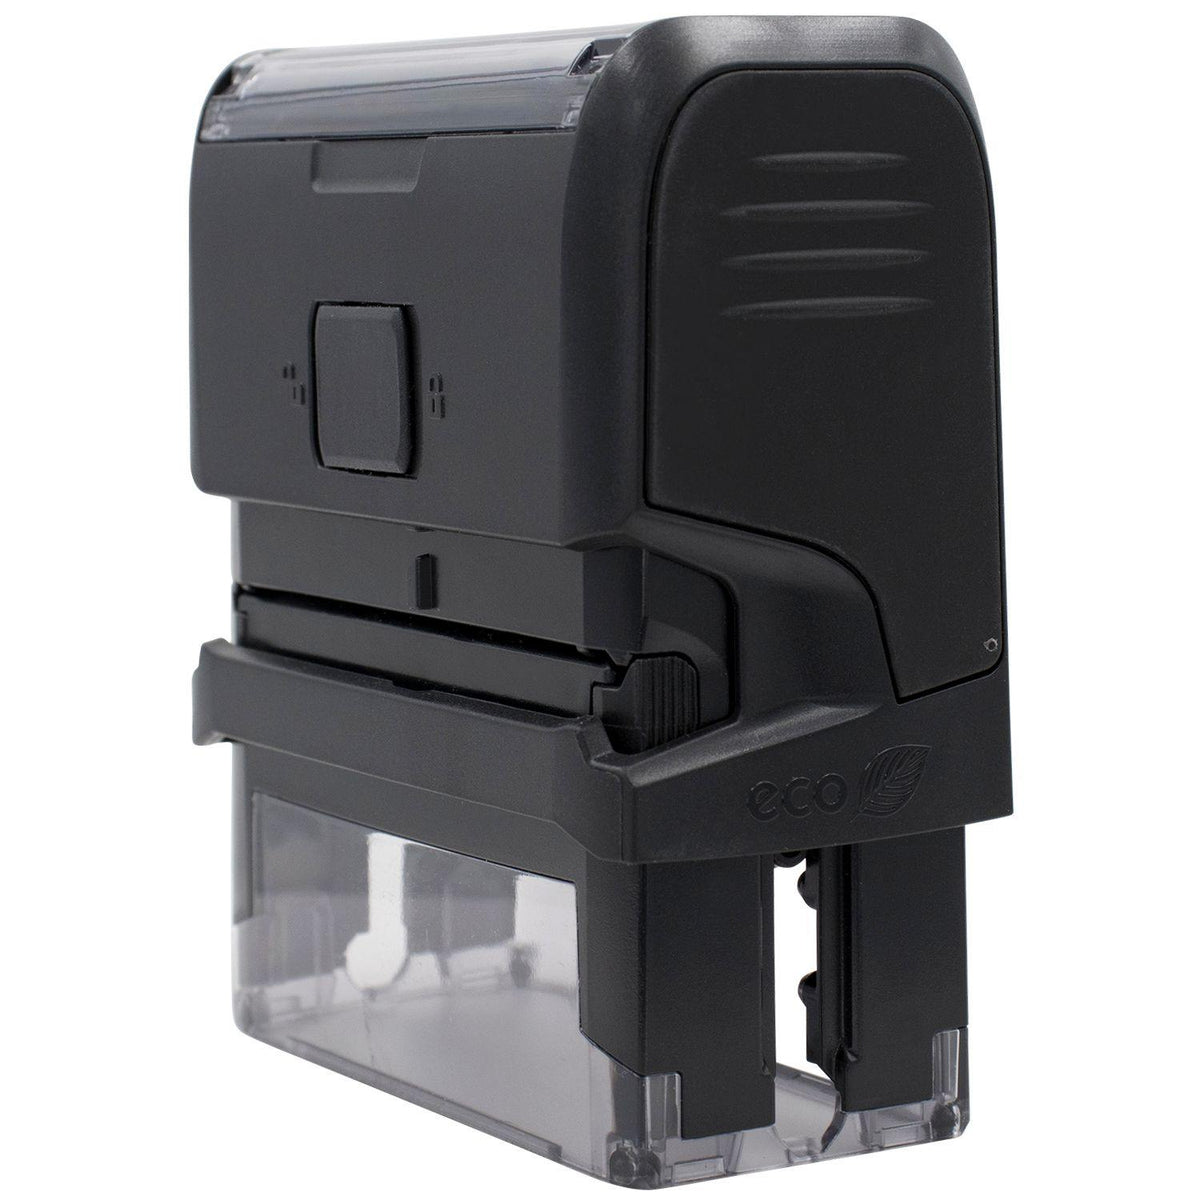 Self-Inking Credito Stamp - Engineer Seal Stamps - Brand_Trodat, Impression Size_Small, Stamp Type_Self-Inking Stamp, Type of Use_Finance, Type of Use_Office